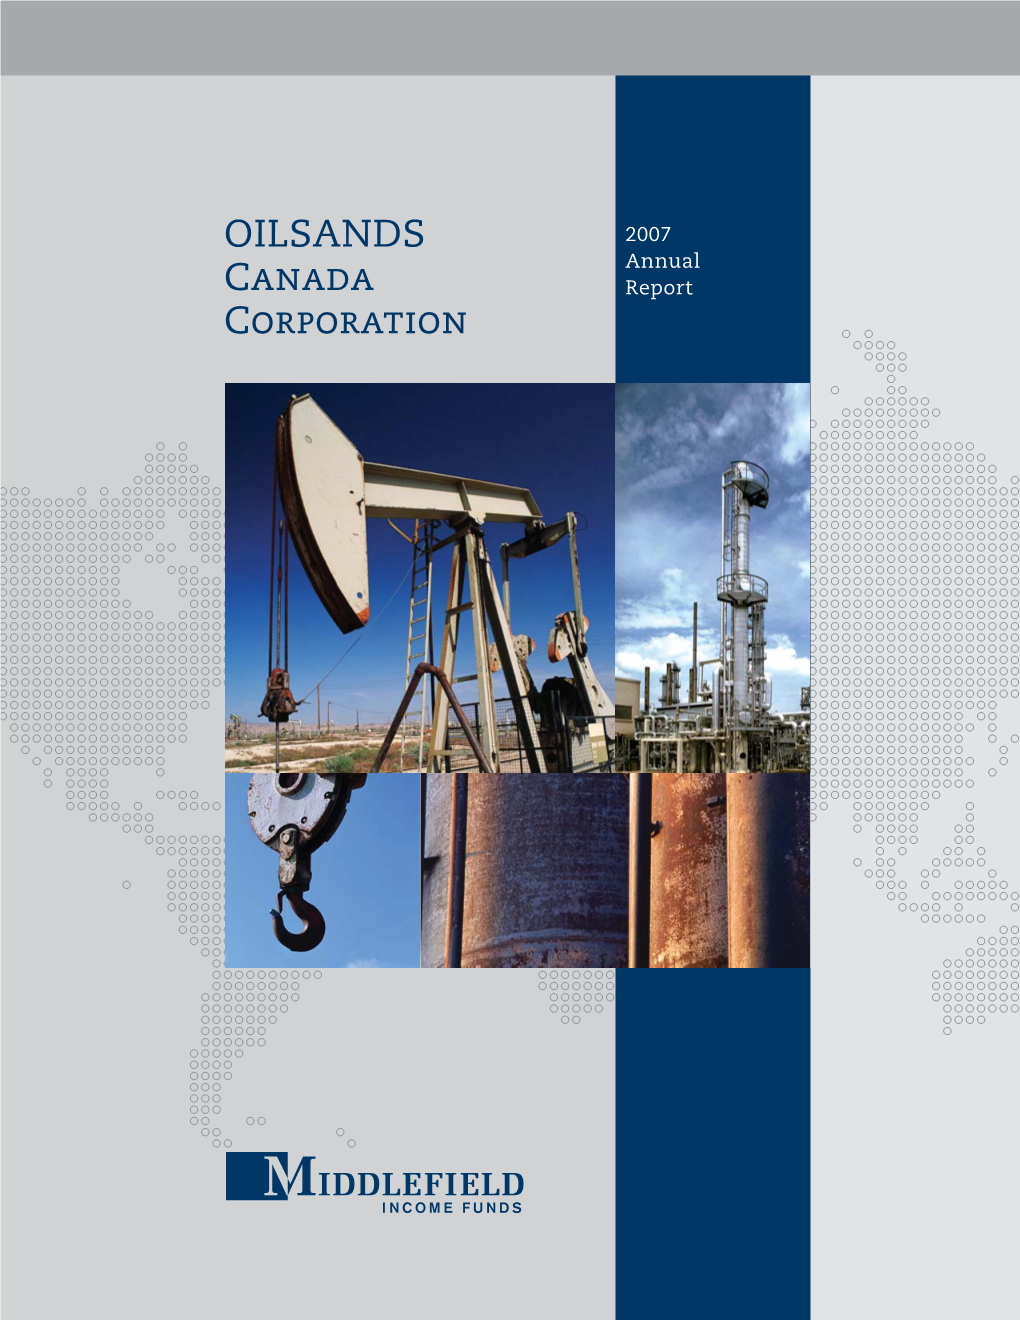 Oilsands Canada Corporation Oilsands Canada Corporation Was Launched in August 2007, Raising $50 Million